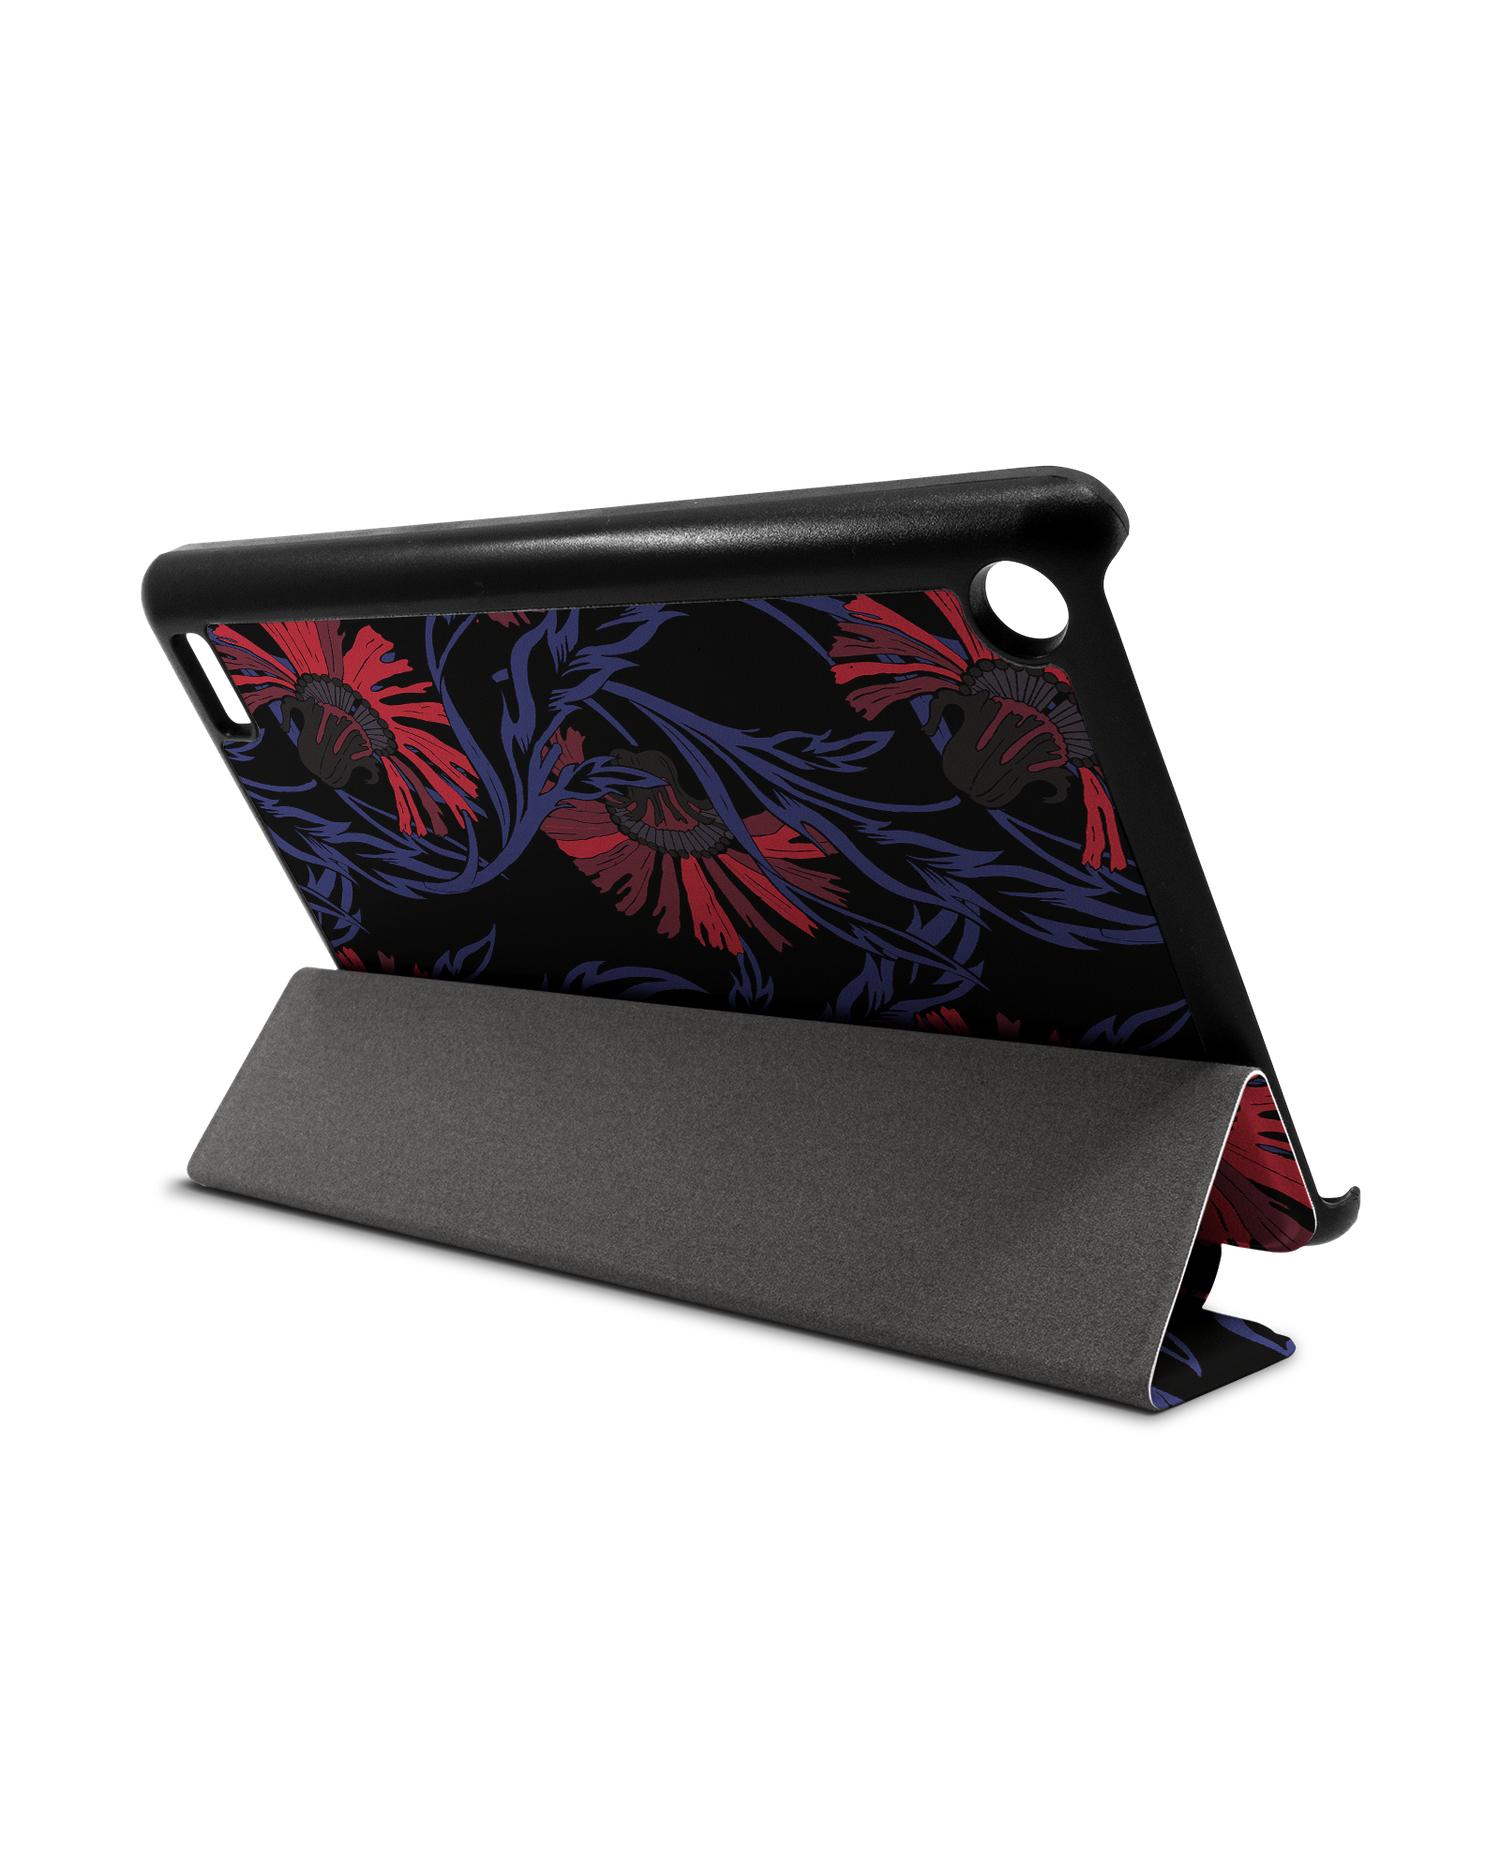 Midnight Floral Tablet Smart Case for Amazon Fire 7: Used as Stand